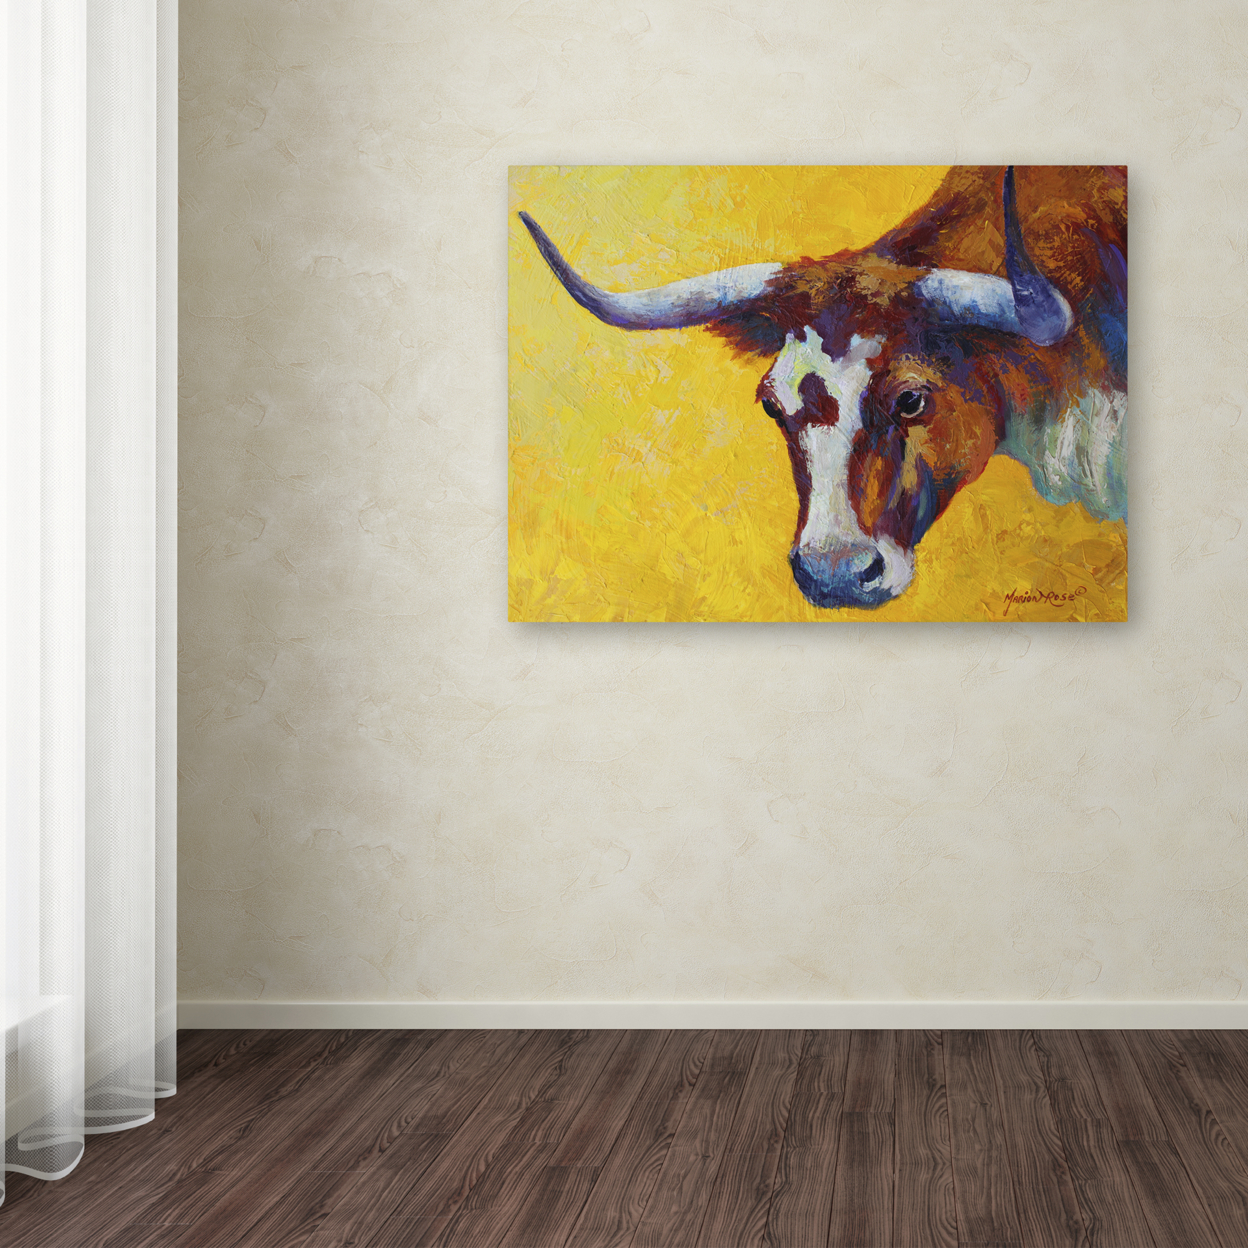 Marion Rose 'Longhorn Cow Study' Ready To Hang Canvas Art 18 X 24 Inches Made In USA